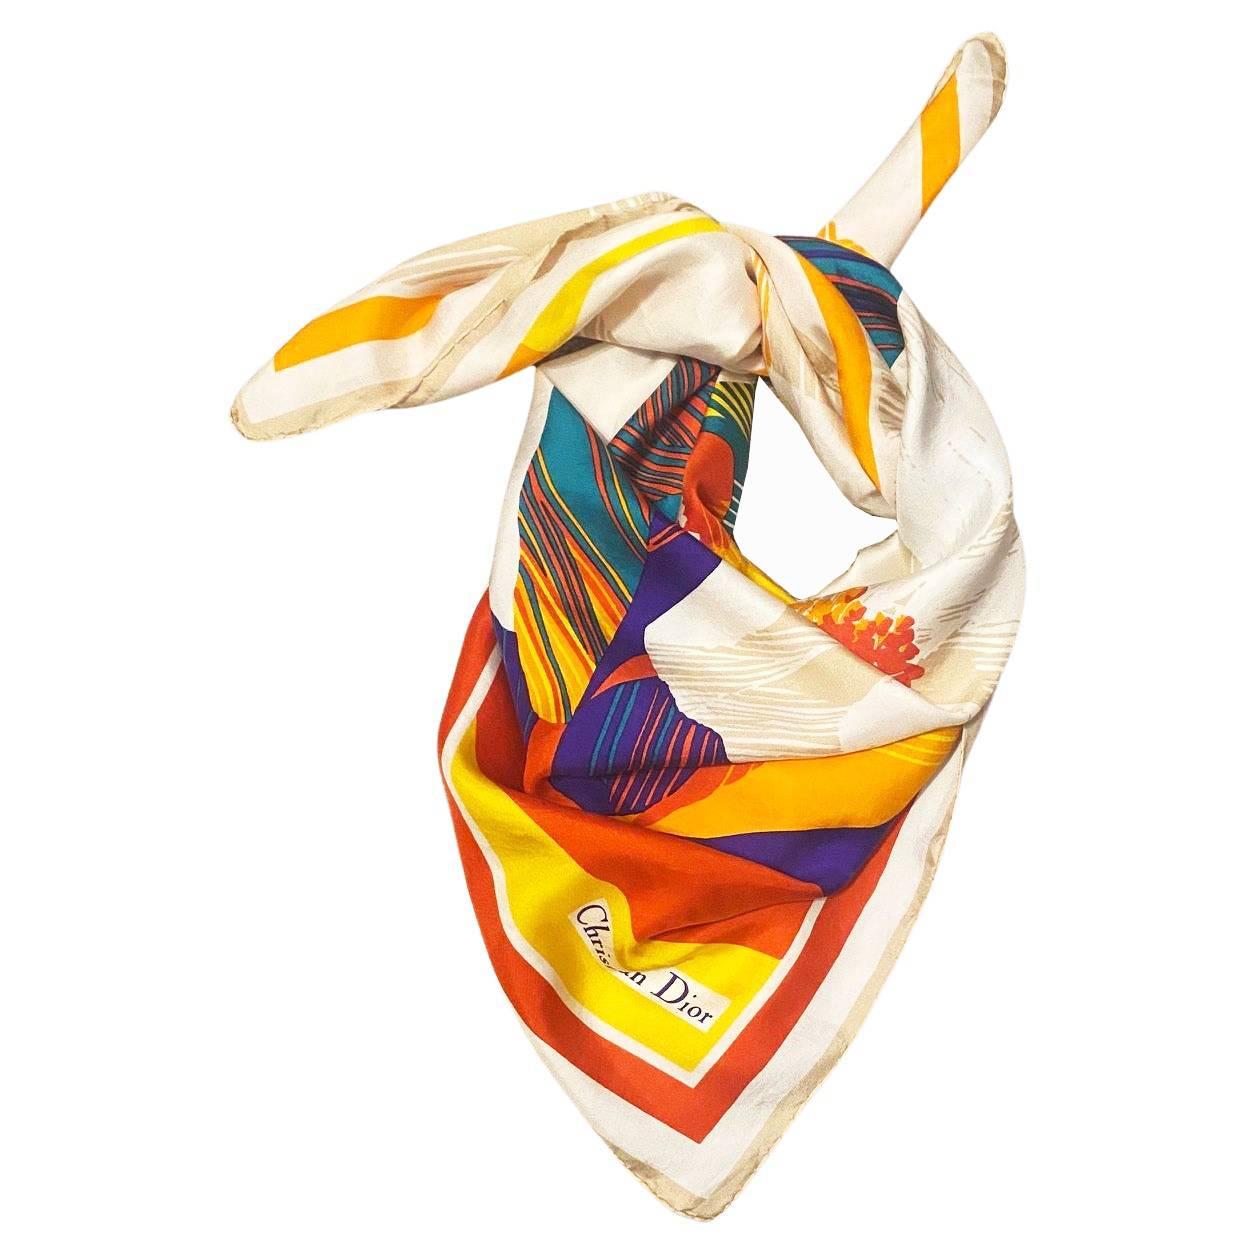 Vintage hand rolled edge silk scarf by Christian Dior featuring cream with abstract leaves in jewel colors of scarlet/orange/emerald & purple This piece ofstatement jewelry will offer a timeless touch to any outfit, with a vintage style that stands